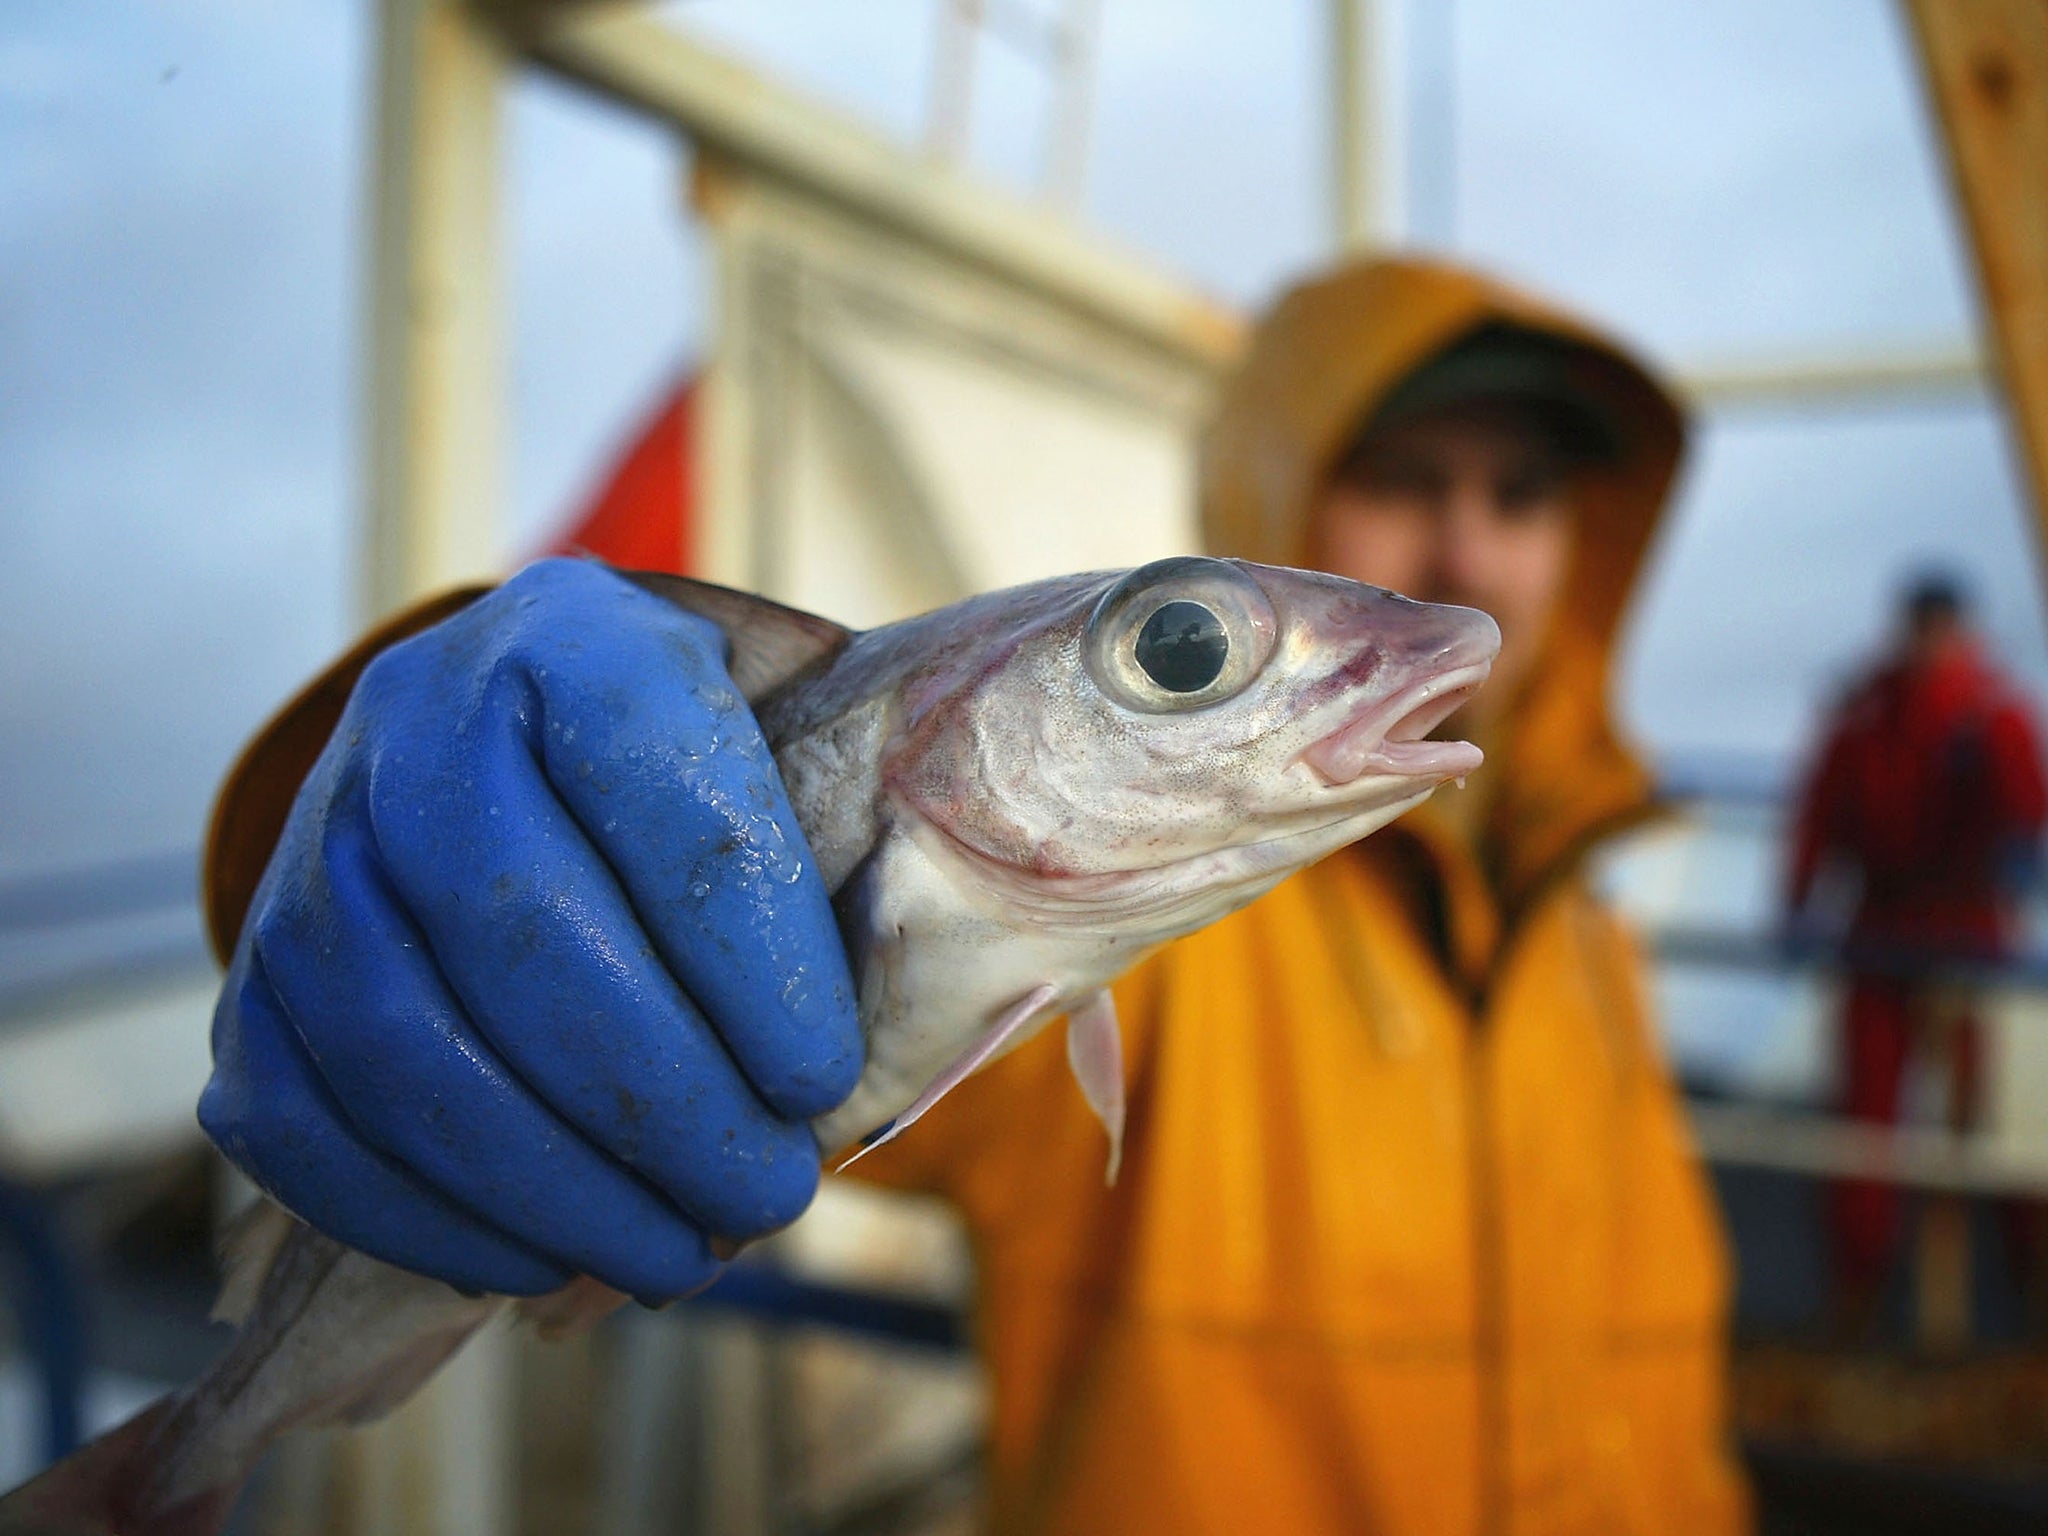 Haddock, lemon sole and plaice could well be replaced by more southern, edible species such as hake, red mullet, gurnard, John Dory, sardines and anchovies